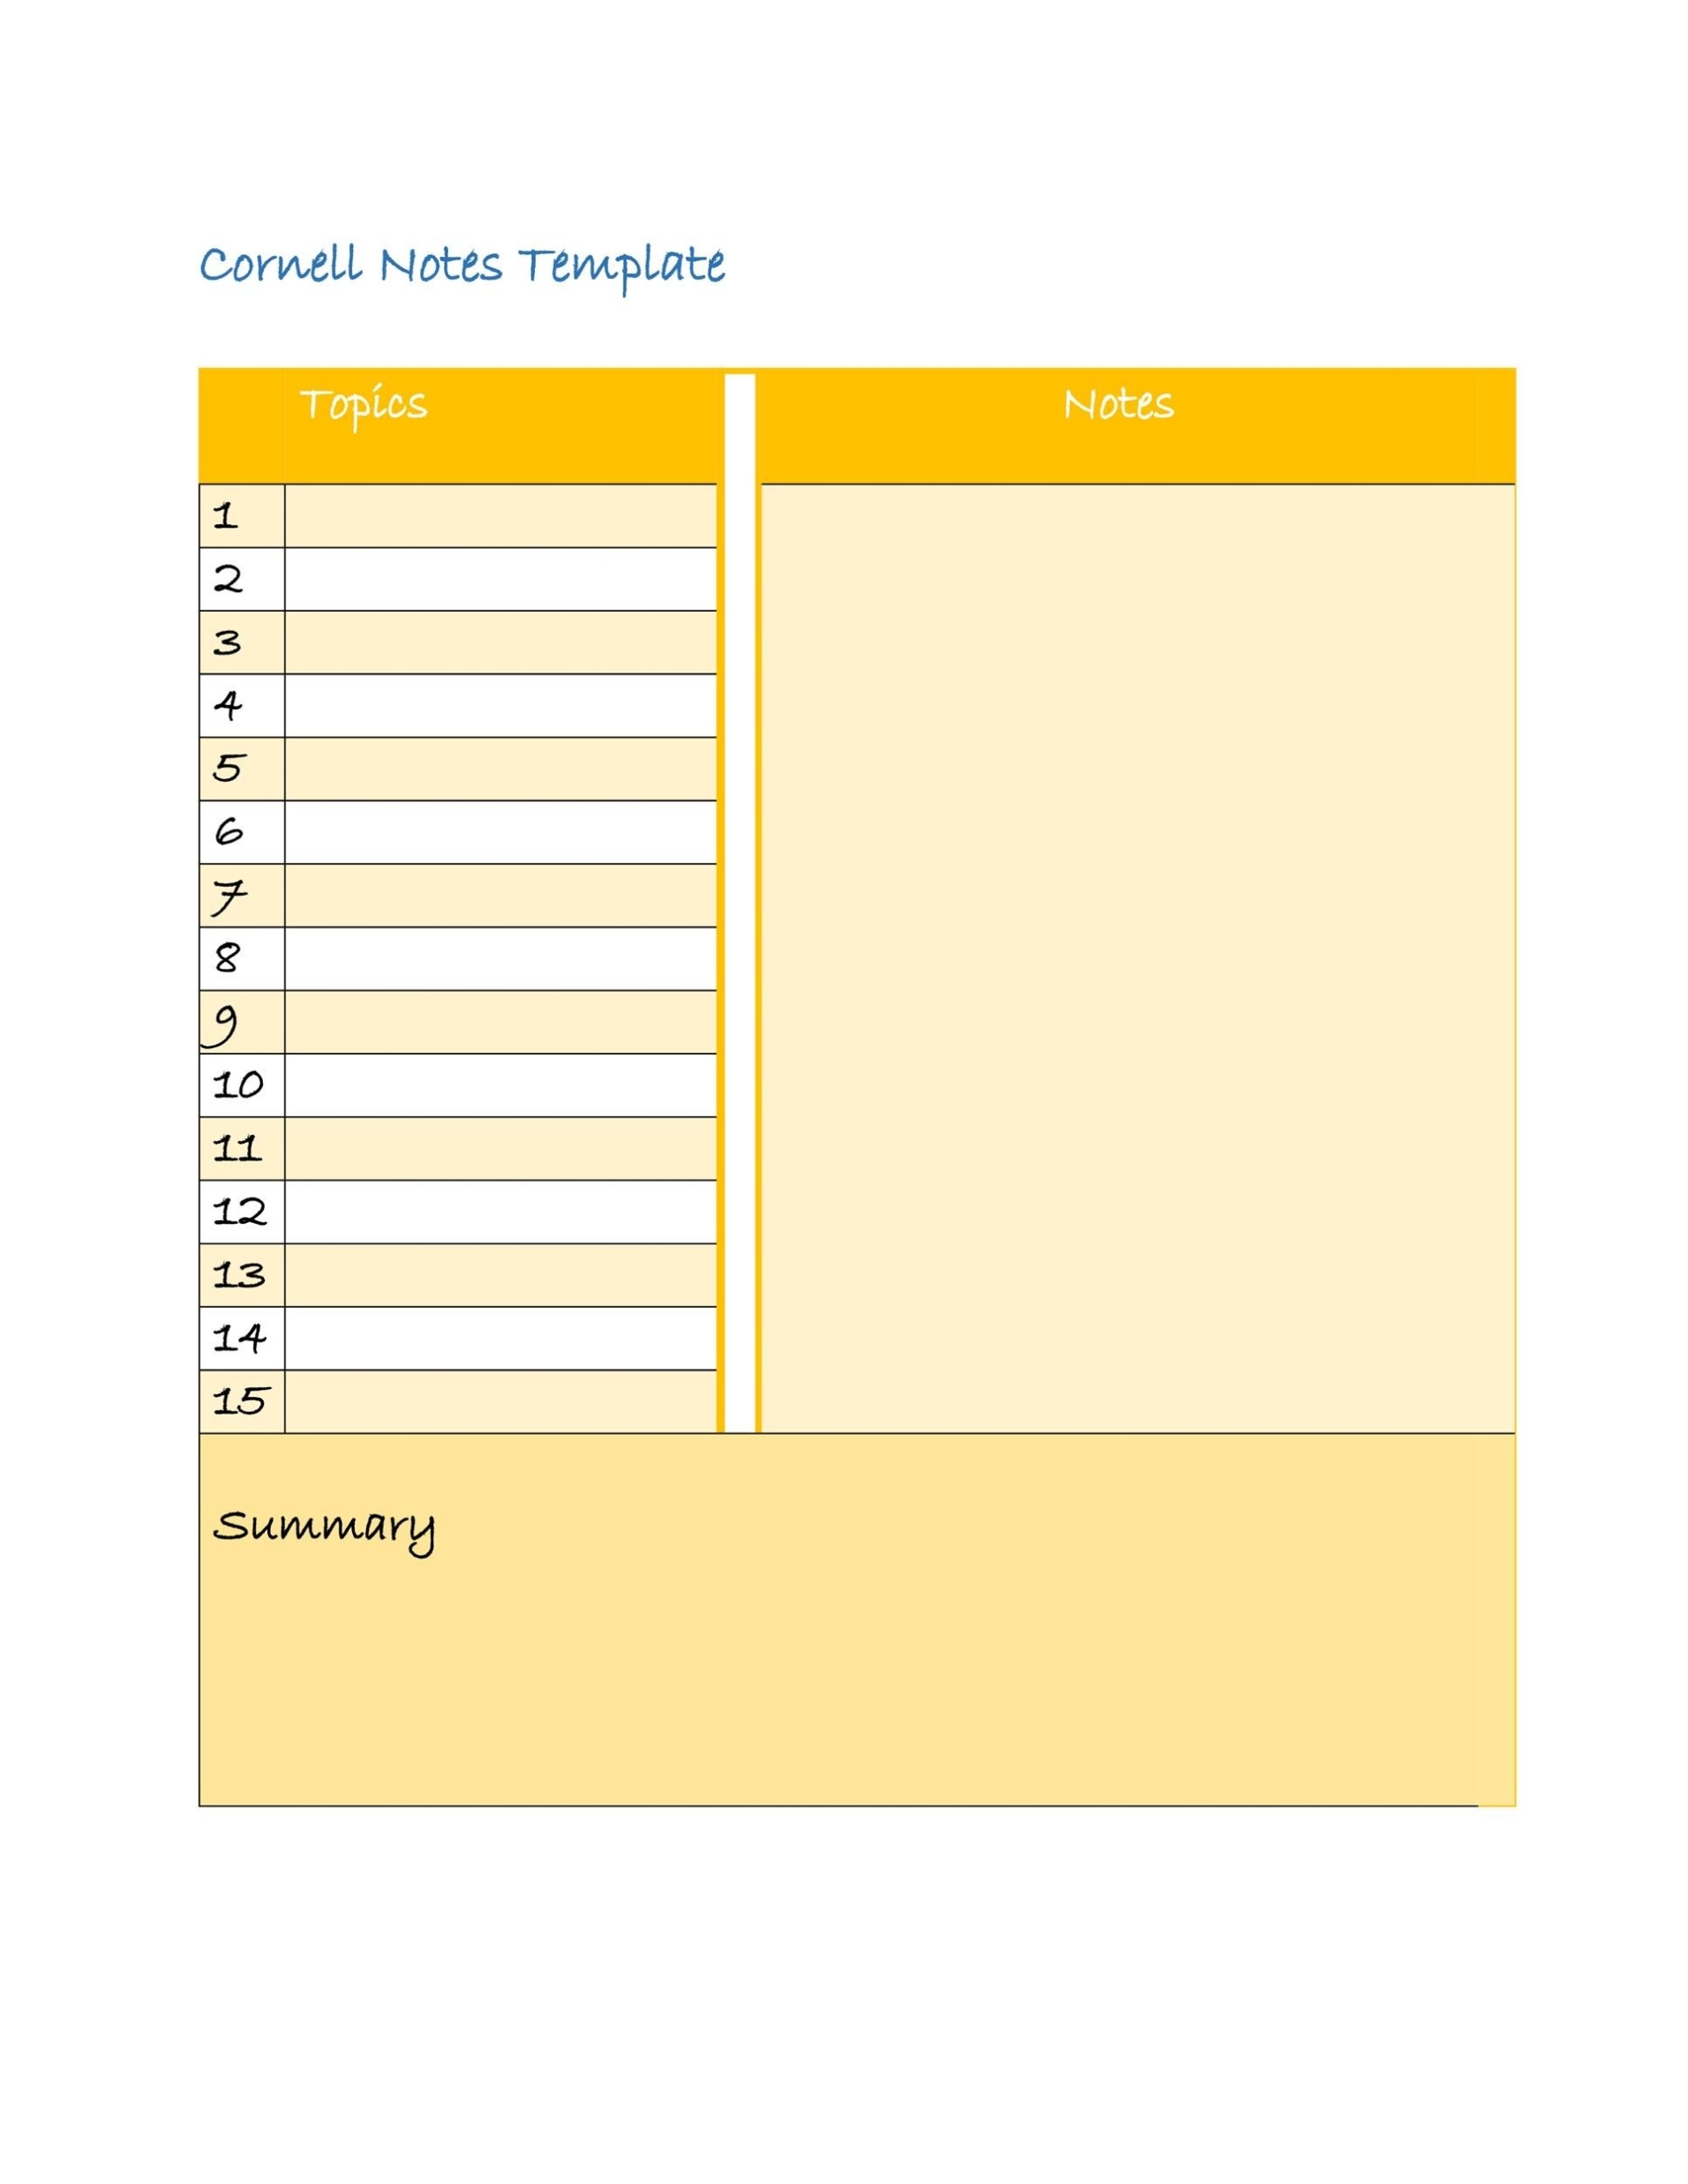 37 Cornell Notes Templates & Examples [Word, Excel, Pdf] ᐅ Pertaining To Cornell Notes Template Word Document